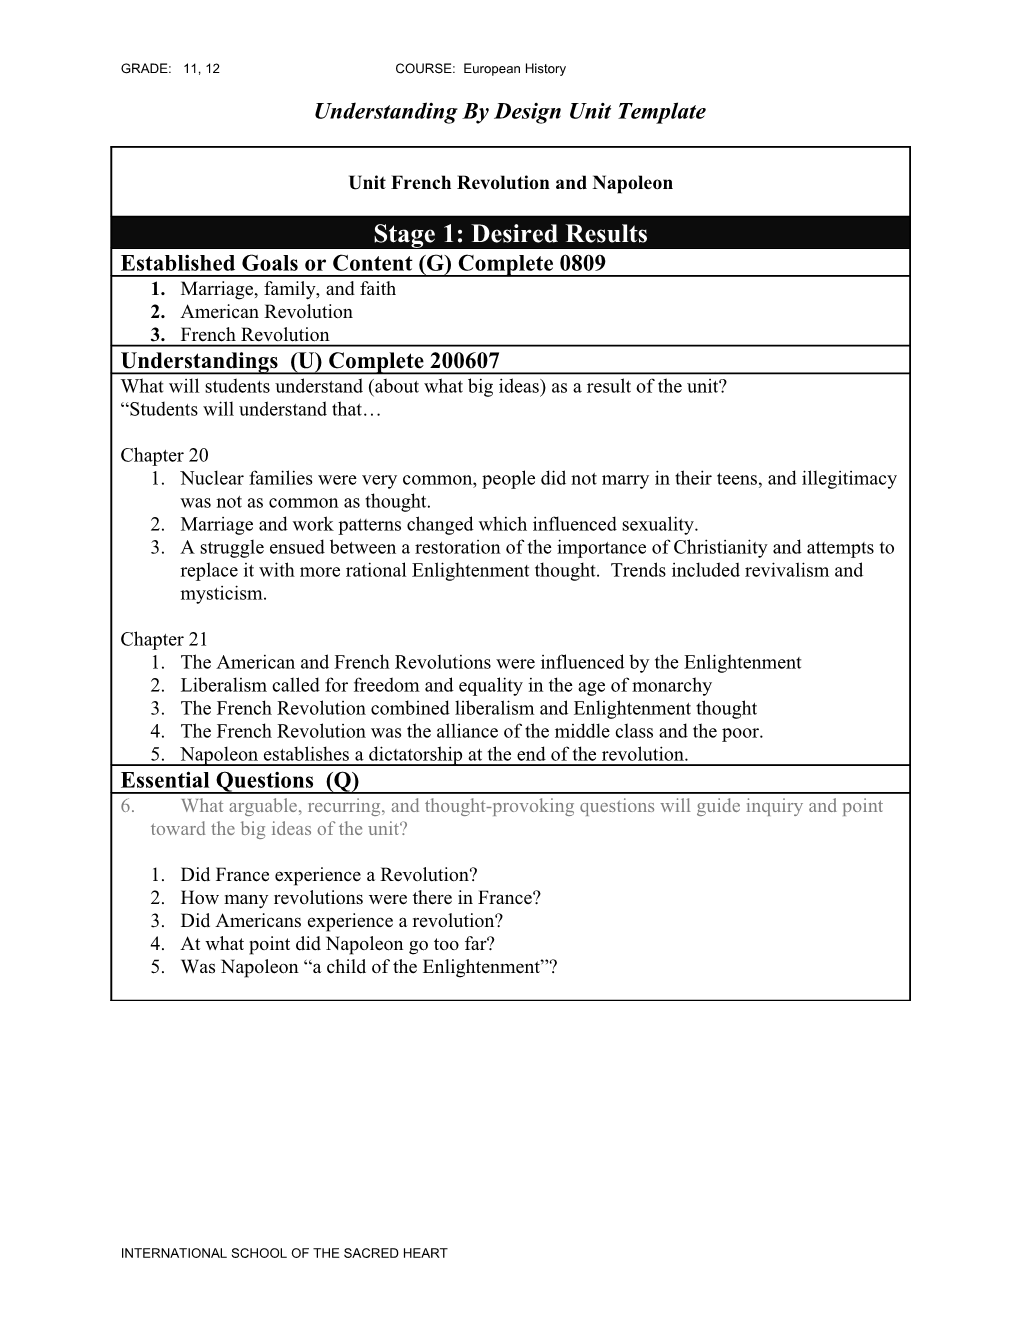 Understanding by Design 1-Page Template